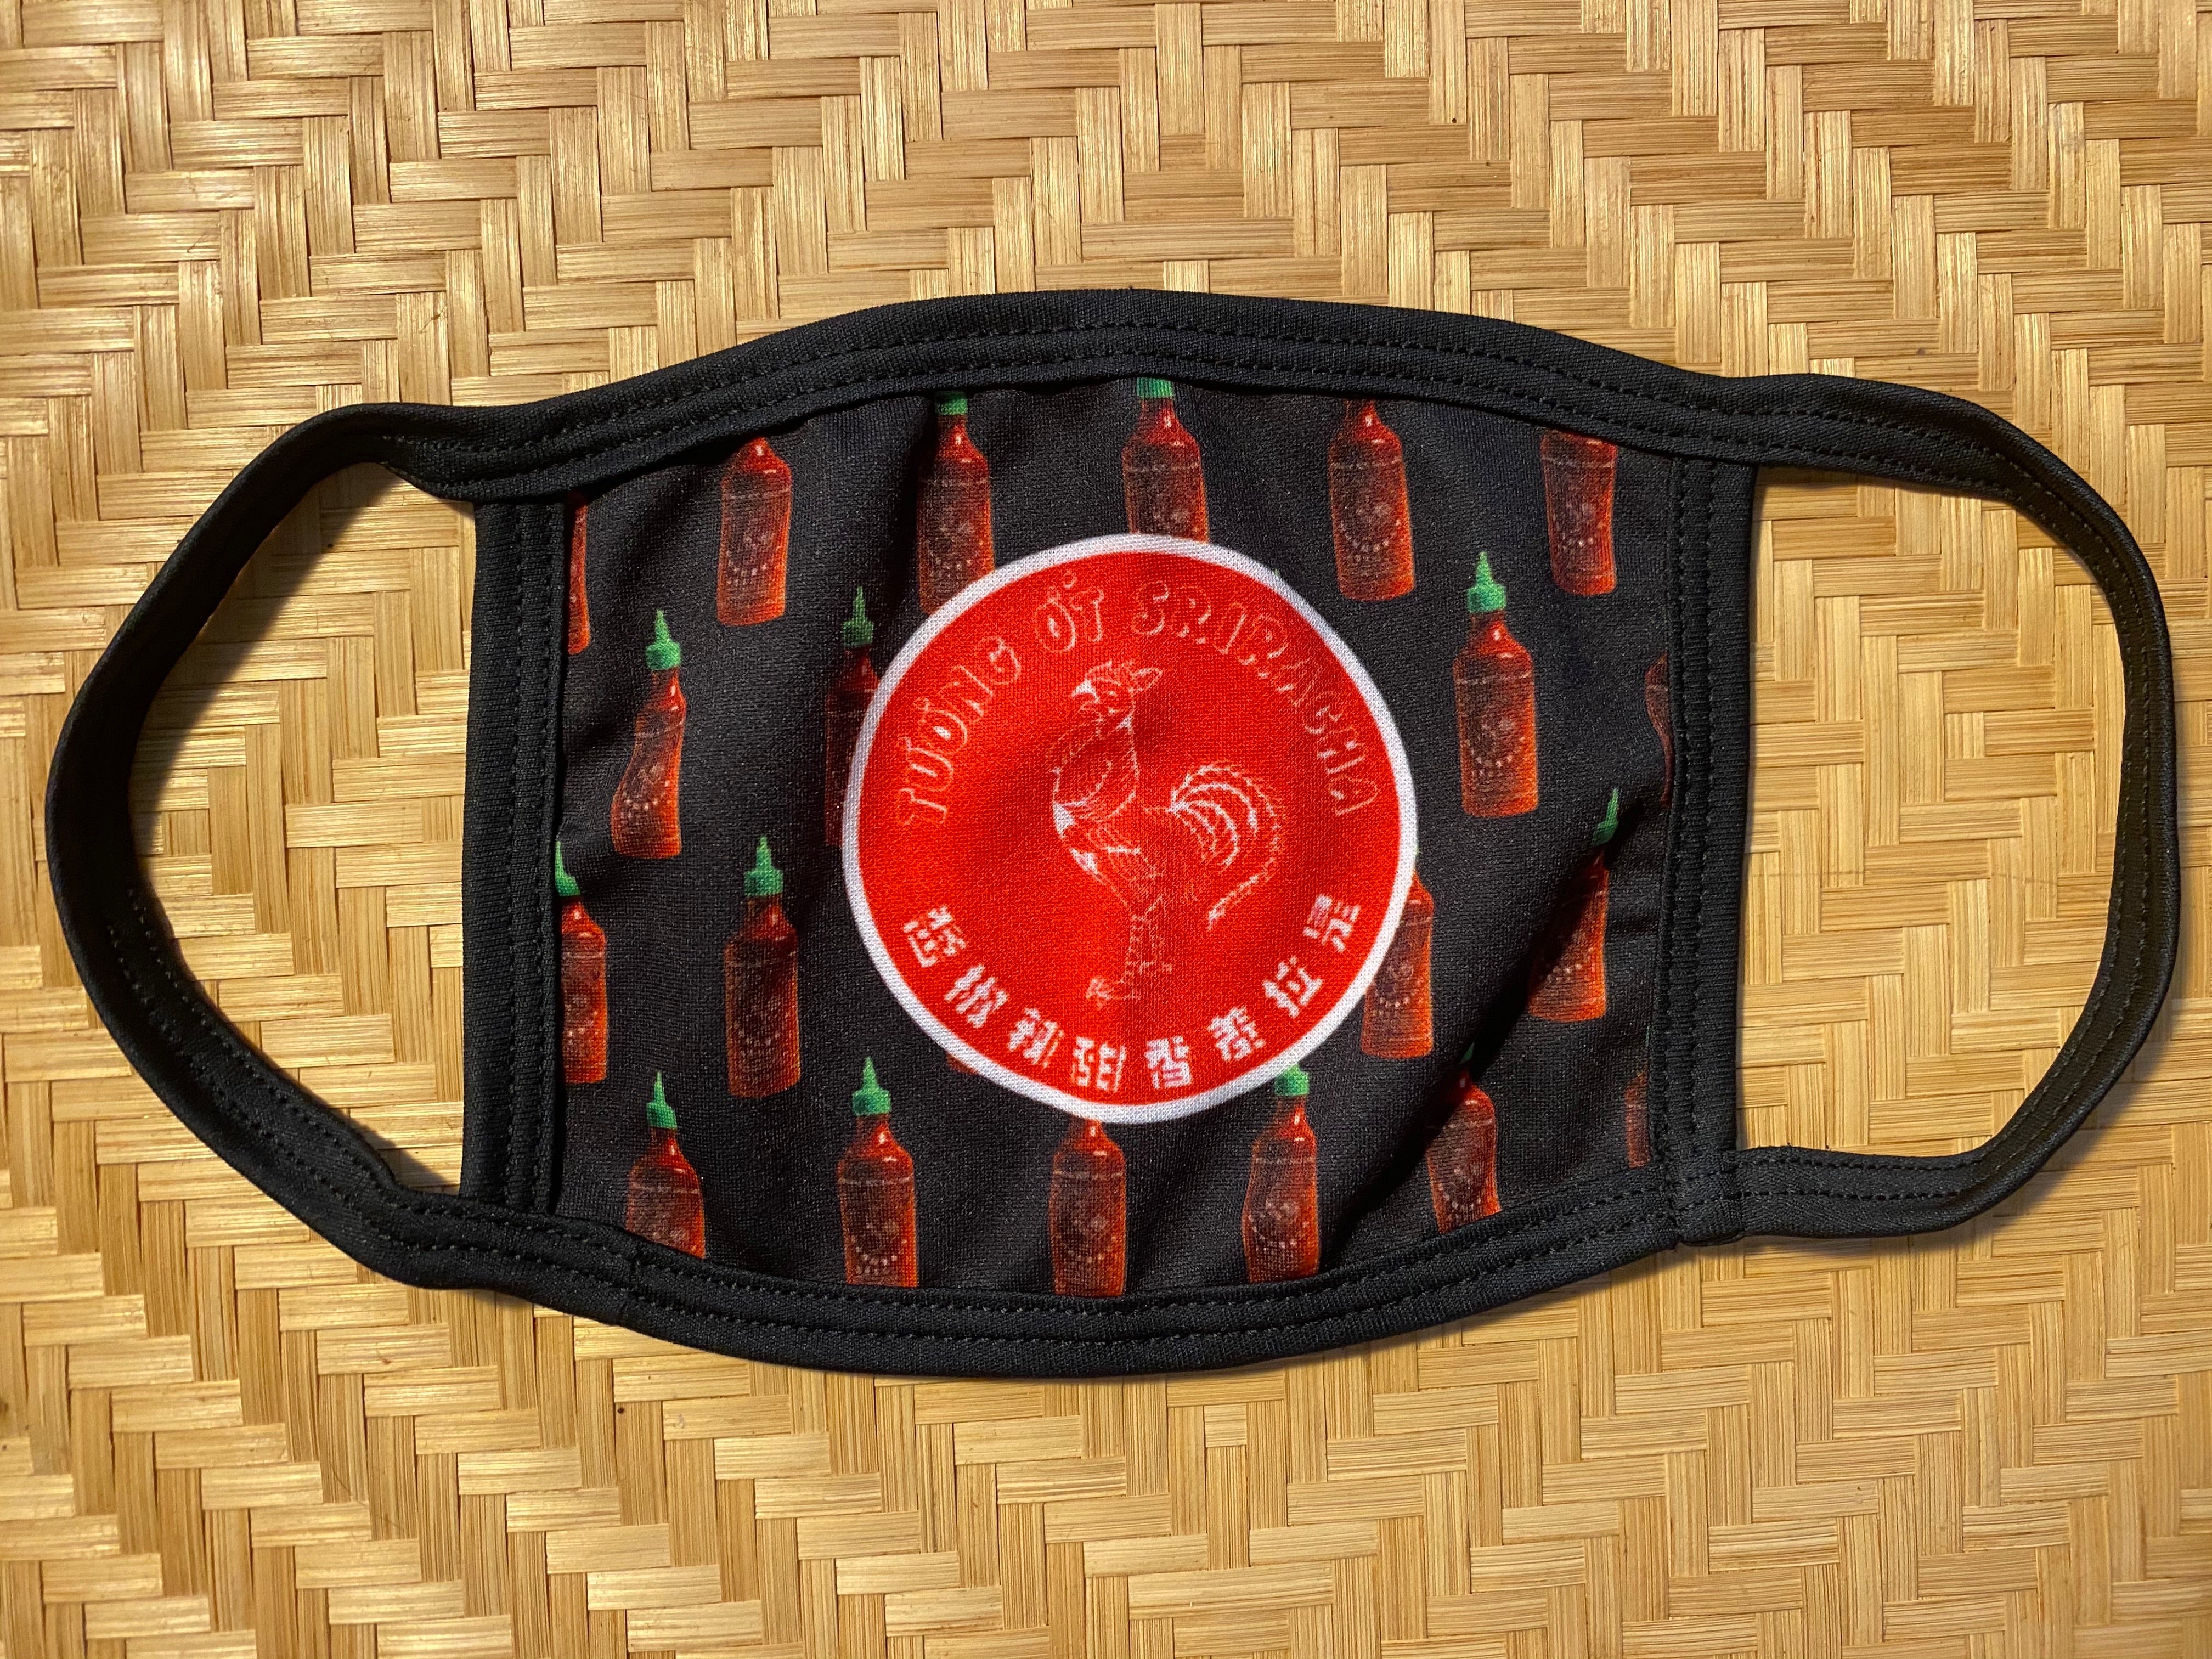 Hot Sauce Protective Dust masks (Limited Edition)